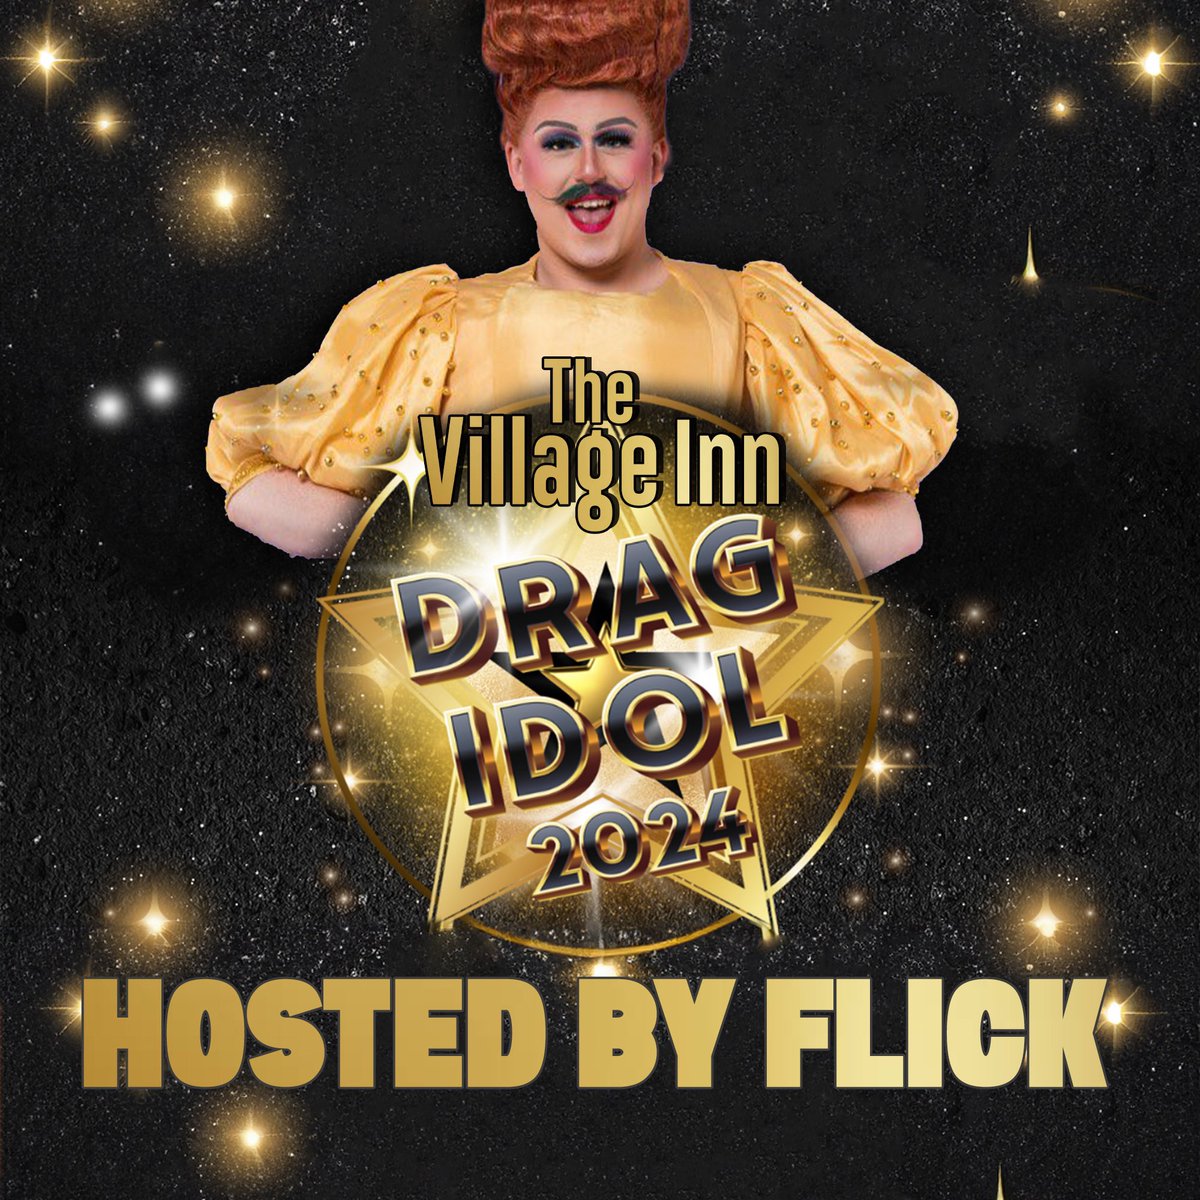 WE’RE PUTTING SOME FLICK IN OUR IDOL! 👠 It’s another heat of @DragIdolUK TONIGHT at the @VillageBrum and we’re being looked after this week by the fabulous @Flickthedrag It’s BUY ONE GET ONE FREE on ALL DRINKS til 9.30pm!